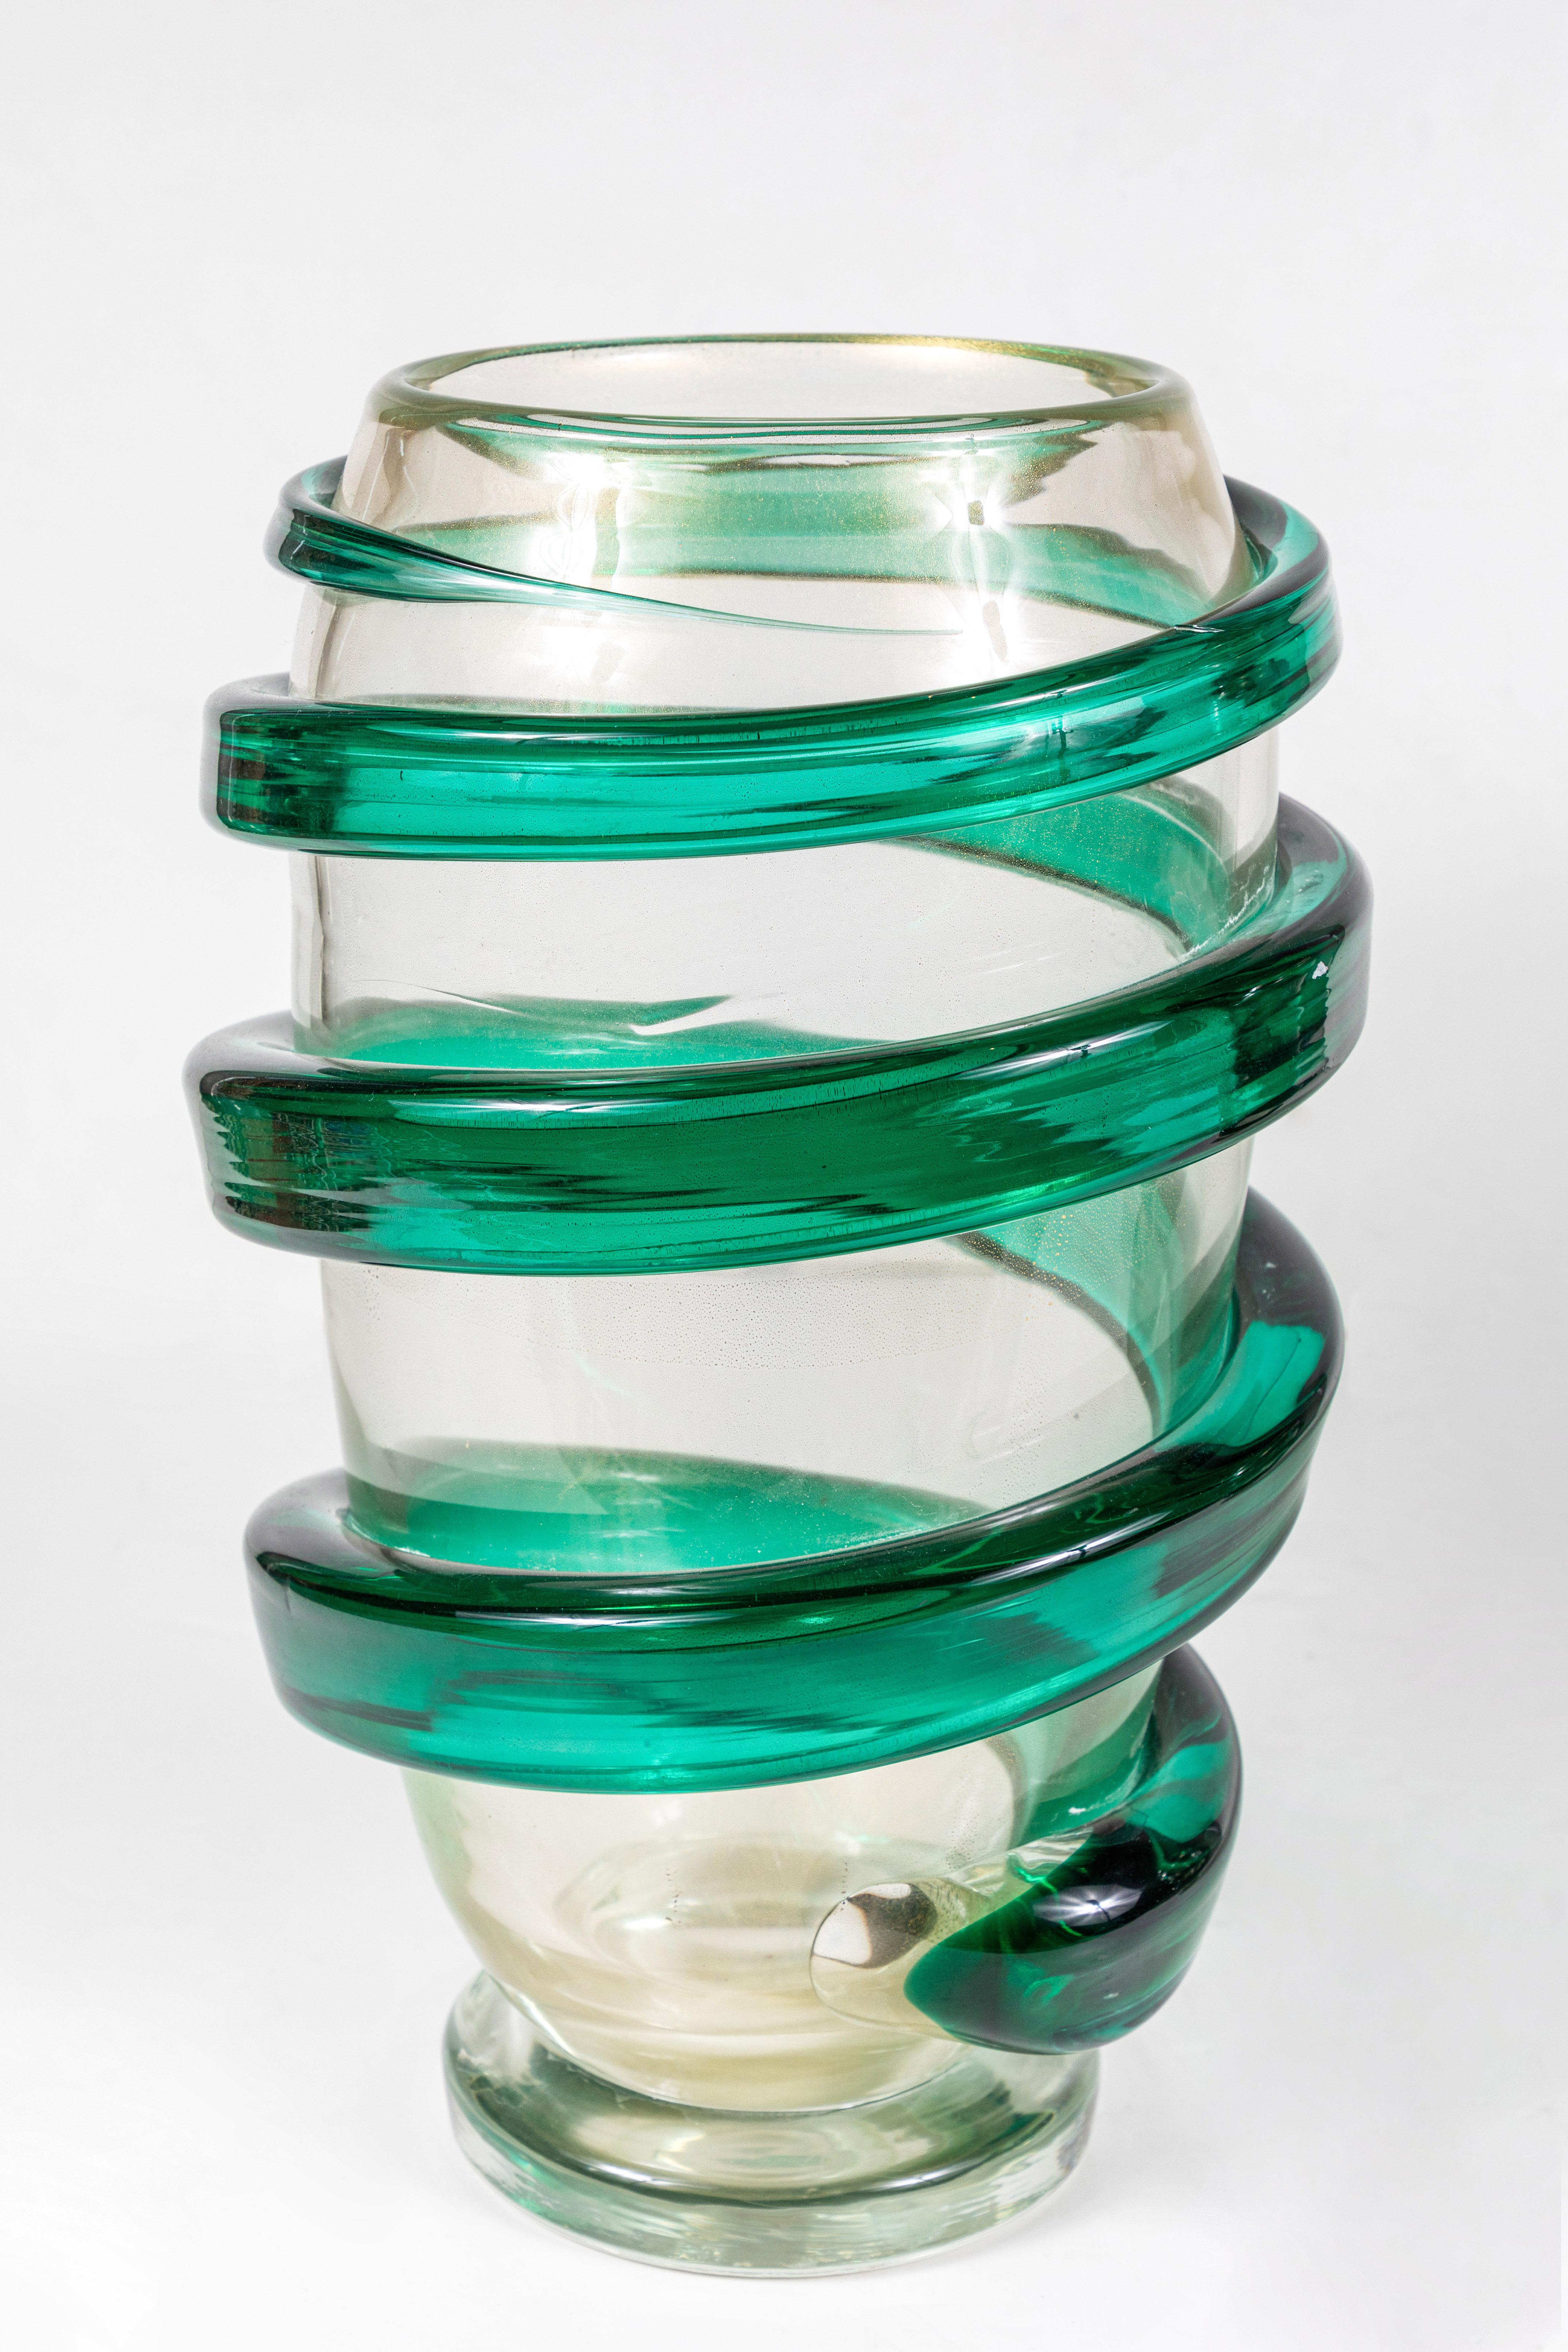 Fabulous pair of 1960s, hand blown, Murano vases embellished with 22-karat gold flecks and surrounded by vibrant, spiral, green extrusions. The vases are signed, though the signature is illegible. Signed 